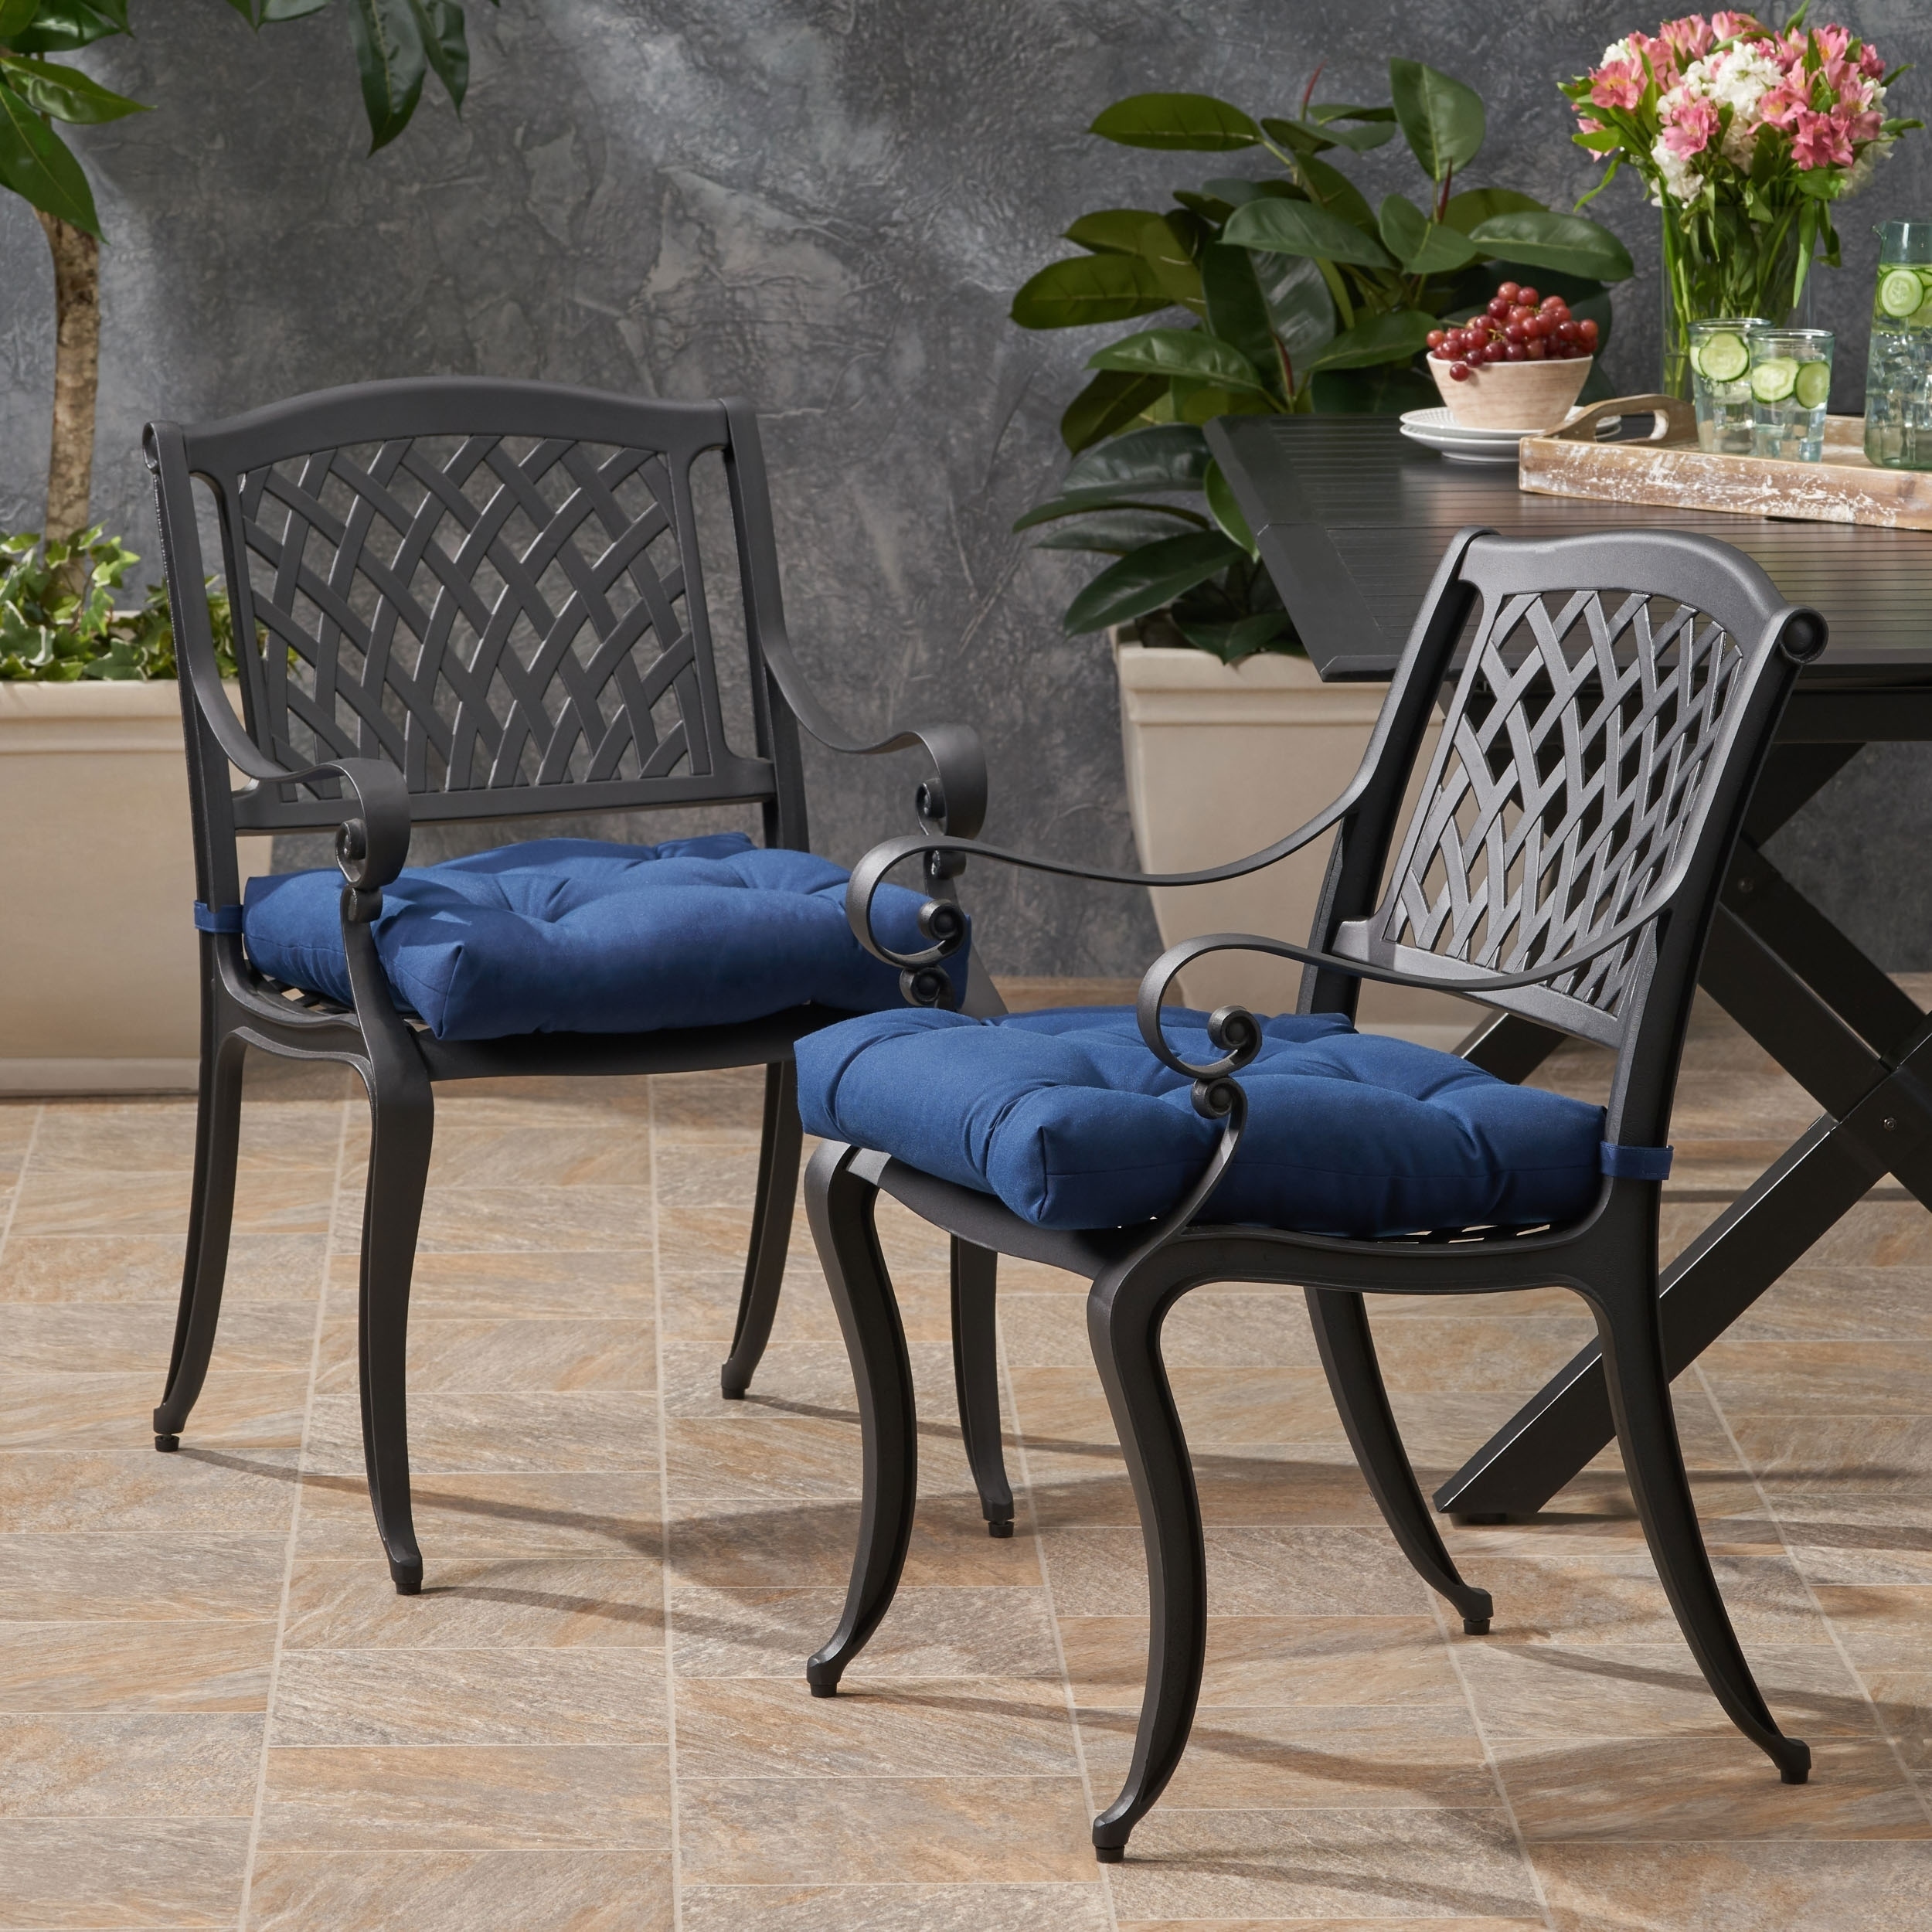 Estella Outdoor Aluminum Dining Chair With Cushion (set Of 2) By Christopher Knight Home